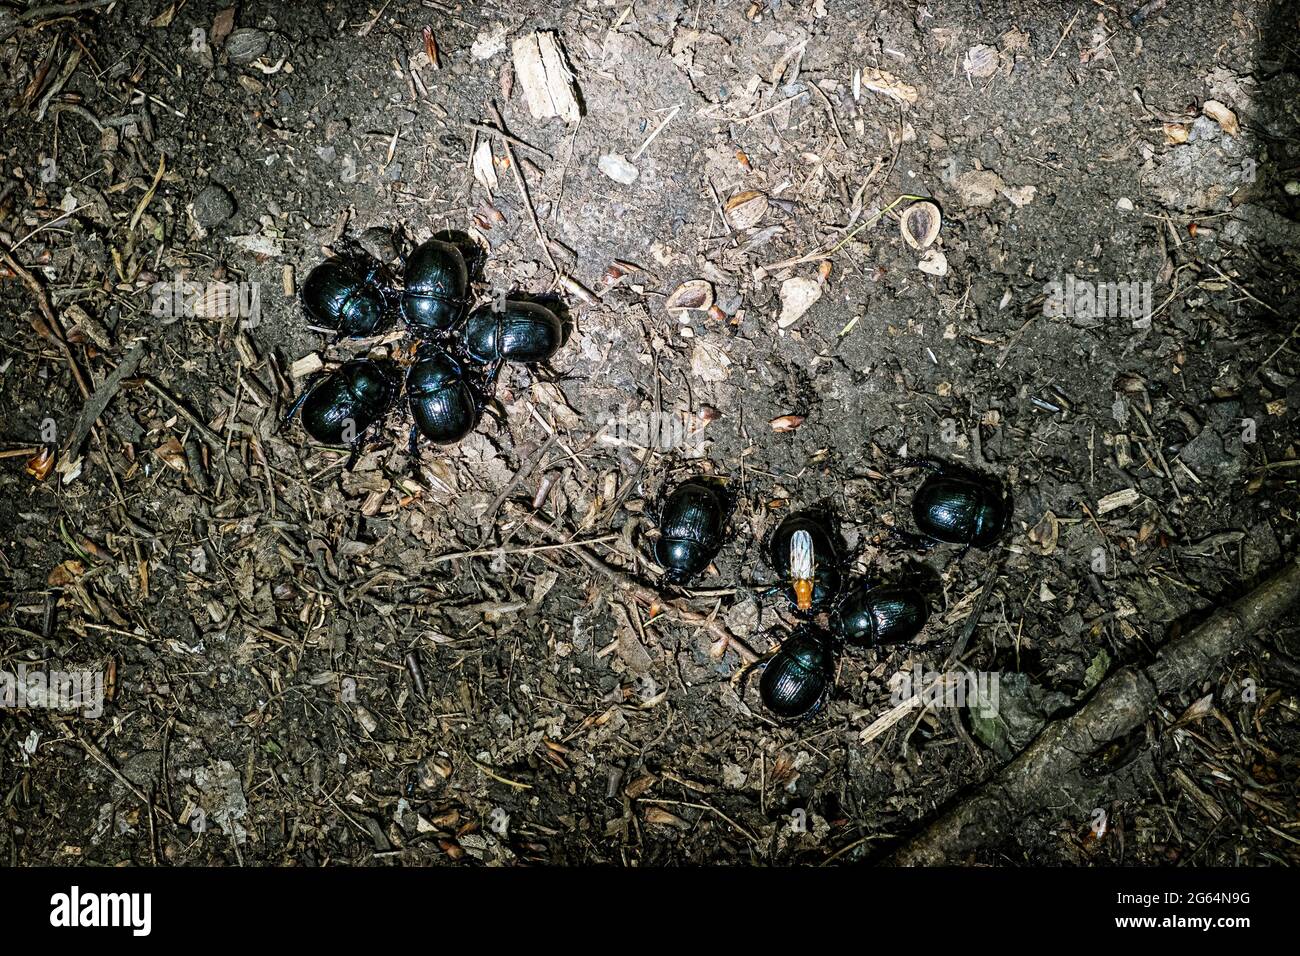 Group of Scarabaeus beetles on the ground. Beauty in nature. Stock Photo